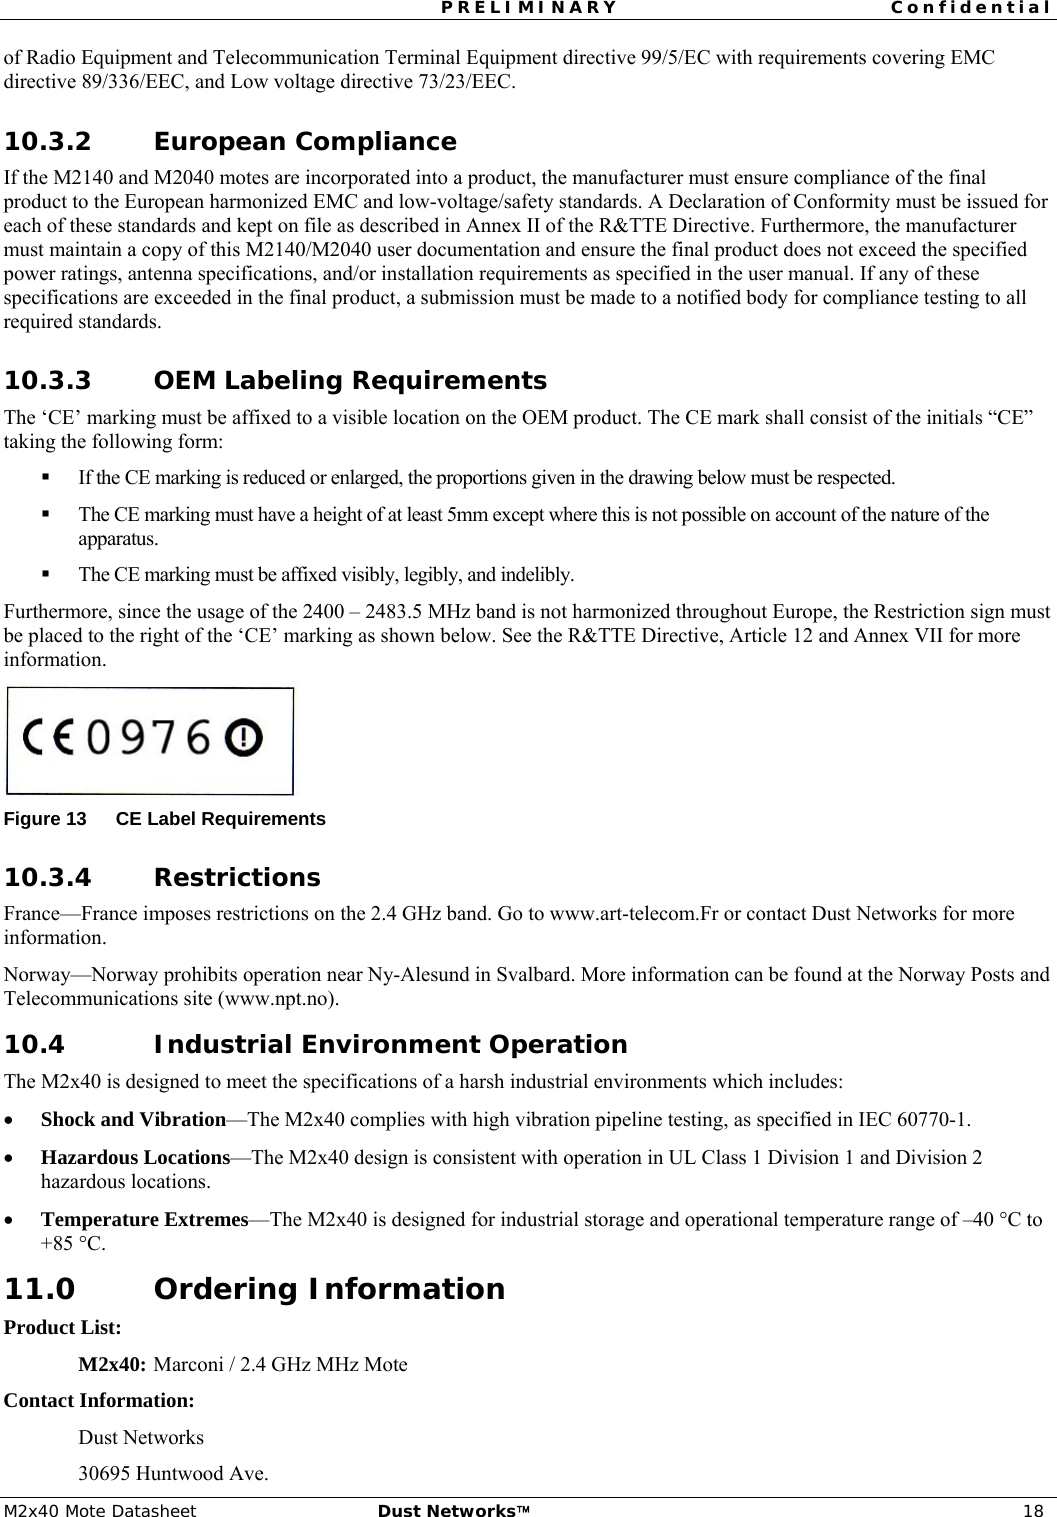 PRELIMINARY Confidential  M2x40 Mote Datasheet  Dust Networks™ 18 of Radio Equipment and Telecommunication Terminal Equipment directive 99/5/EC with requirements covering EMC directive 89/336/EEC, and Low voltage directive 73/23/EEC. 10.3.2 European Compliance If the M2140 and M2040 motes are incorporated into a product, the manufacturer must ensure compliance of the final product to the European harmonized EMC and low-voltage/safety standards. A Declaration of Conformity must be issued for each of these standards and kept on file as described in Annex II of the R&amp;TTE Directive. Furthermore, the manufacturer must maintain a copy of this M2140/M2040 user documentation and ensure the final product does not exceed the specified power ratings, antenna specifications, and/or installation requirements as specified in the user manual. If any of these specifications are exceeded in the final product, a submission must be made to a notified body for compliance testing to all required standards. 10.3.3 OEM Labeling Requirements The ‘CE’ marking must be affixed to a visible location on the OEM product. The CE mark shall consist of the initials “CE” taking the following form:  If the CE marking is reduced or enlarged, the proportions given in the drawing below must be respected.  The CE marking must have a height of at least 5mm except where this is not possible on account of the nature of the apparatus.  The CE marking must be affixed visibly, legibly, and indelibly. Furthermore, since the usage of the 2400 – 2483.5 MHz band is not harmonized throughout Europe, the Restriction sign must be placed to the right of the ‘CE’ marking as shown below. See the R&amp;TTE Directive, Article 12 and Annex VII for more information.  Figure 13  CE Label Requirements 10.3.4 Restrictions France—France imposes restrictions on the 2.4 GHz band. Go to www.art-telecom.Fr or contact Dust Networks for more information. Norway—Norway prohibits operation near Ny-Alesund in Svalbard. More information can be found at the Norway Posts and Telecommunications site (www.npt.no). 10.4 Industrial Environment Operation The M2x40 is designed to meet the specifications of a harsh industrial environments which includes: • Shock and Vibration—The M2x40 complies with high vibration pipeline testing, as specified in IEC 60770-1. • Hazardous Locations—The M2x40 design is consistent with operation in UL Class 1 Division 1 and Division 2 hazardous locations. • Temperature Extremes—The M2x40 is designed for industrial storage and operational temperature range of –40 °C to +85 °C. 11.0 Ordering Information Product List: M2x40:  Marconi / 2.4 GHz MHz Mote Contact Information: Dust Networks 30695 Huntwood Ave. 